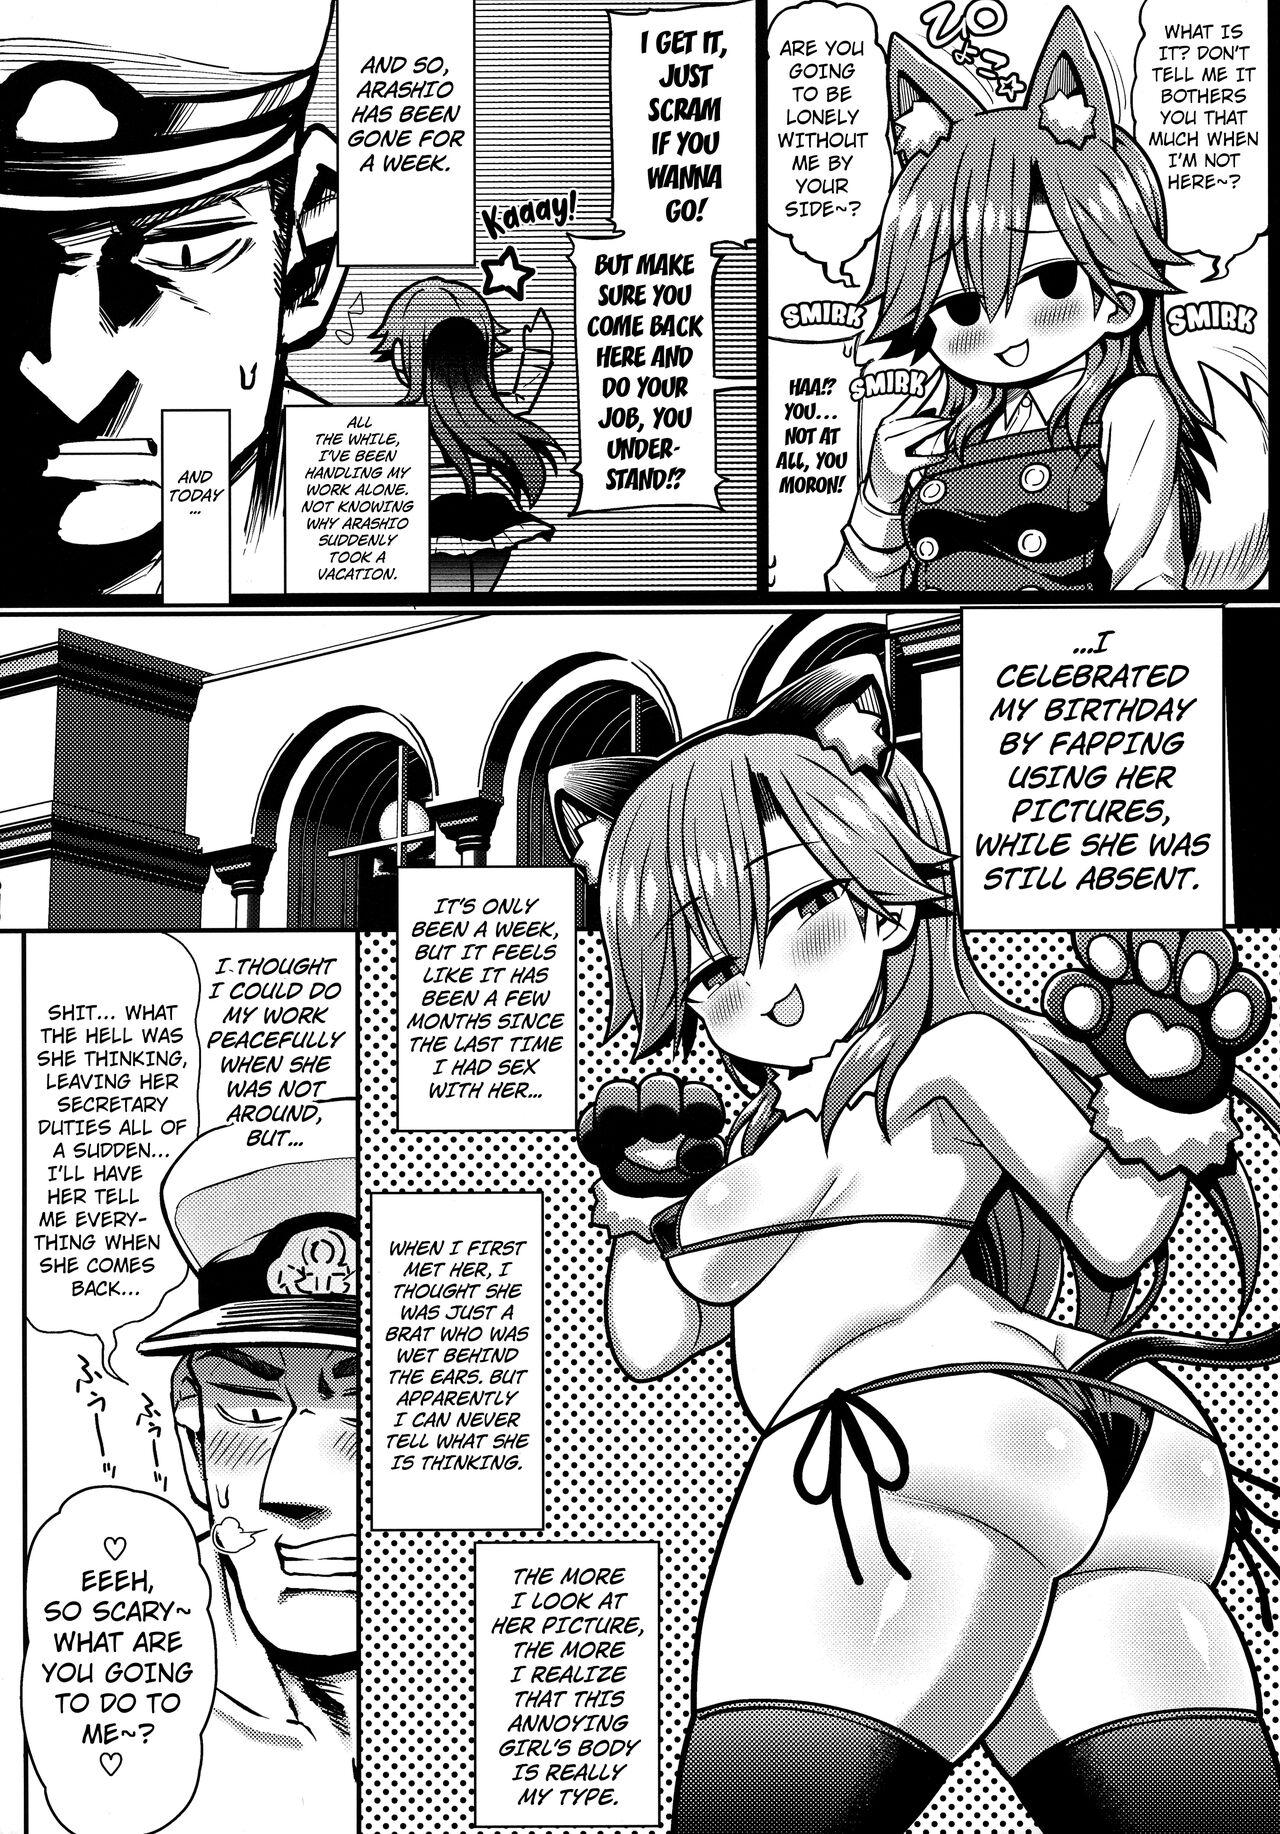 Celebrity Omae no Sei dakara na! | It's Your Fault. You Know!? - Kantai collection Chacal - Page 5